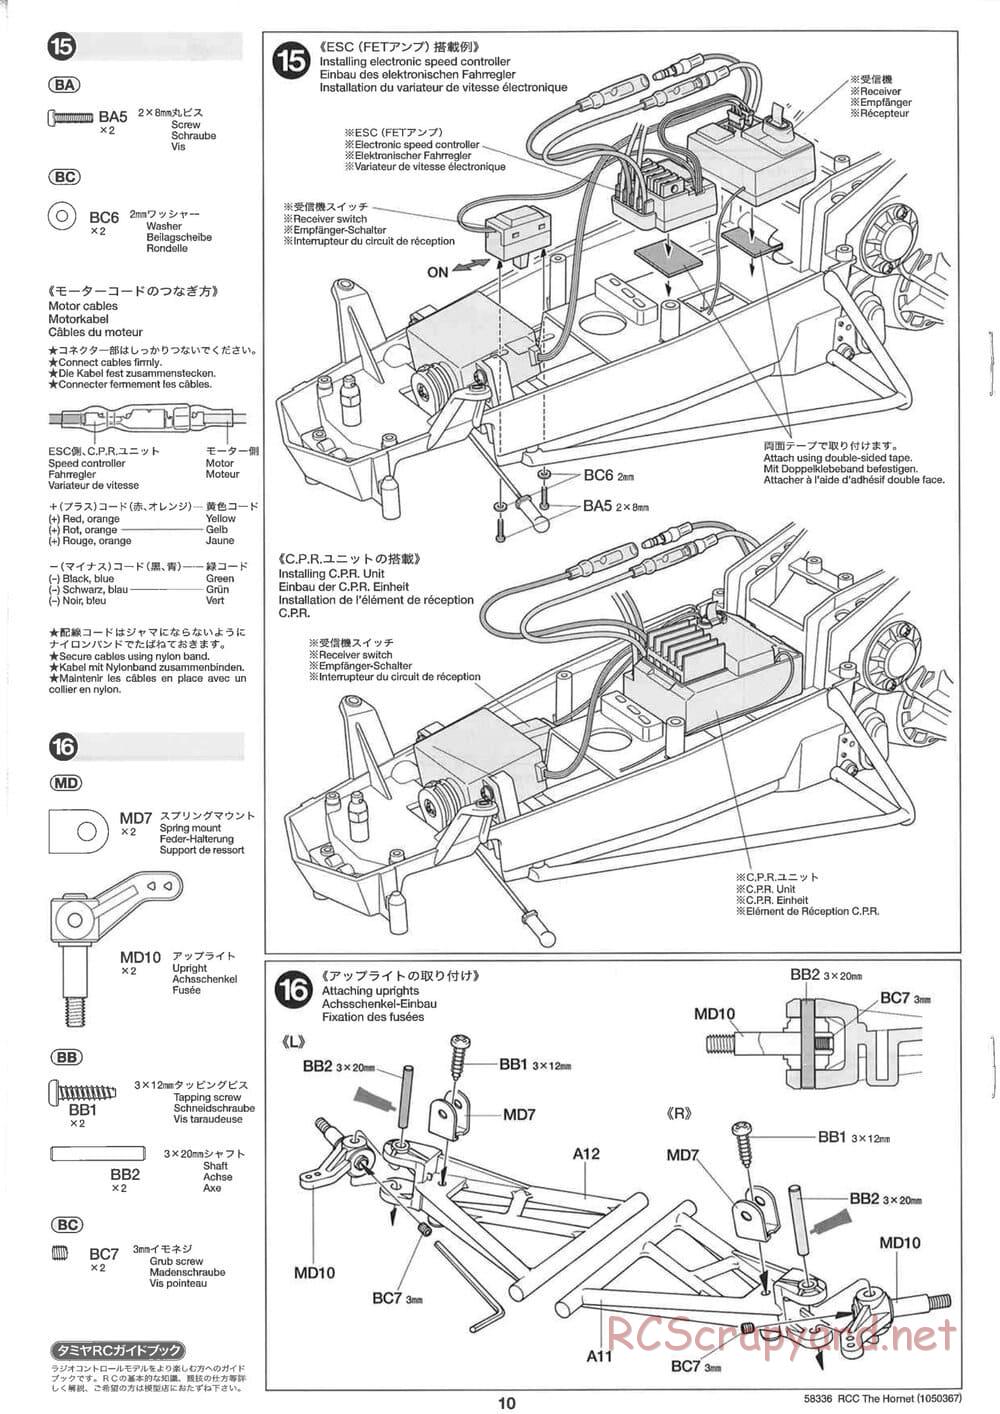 Tamiya - The Hornet (2004) - GH Chassis - Manual - Page 10